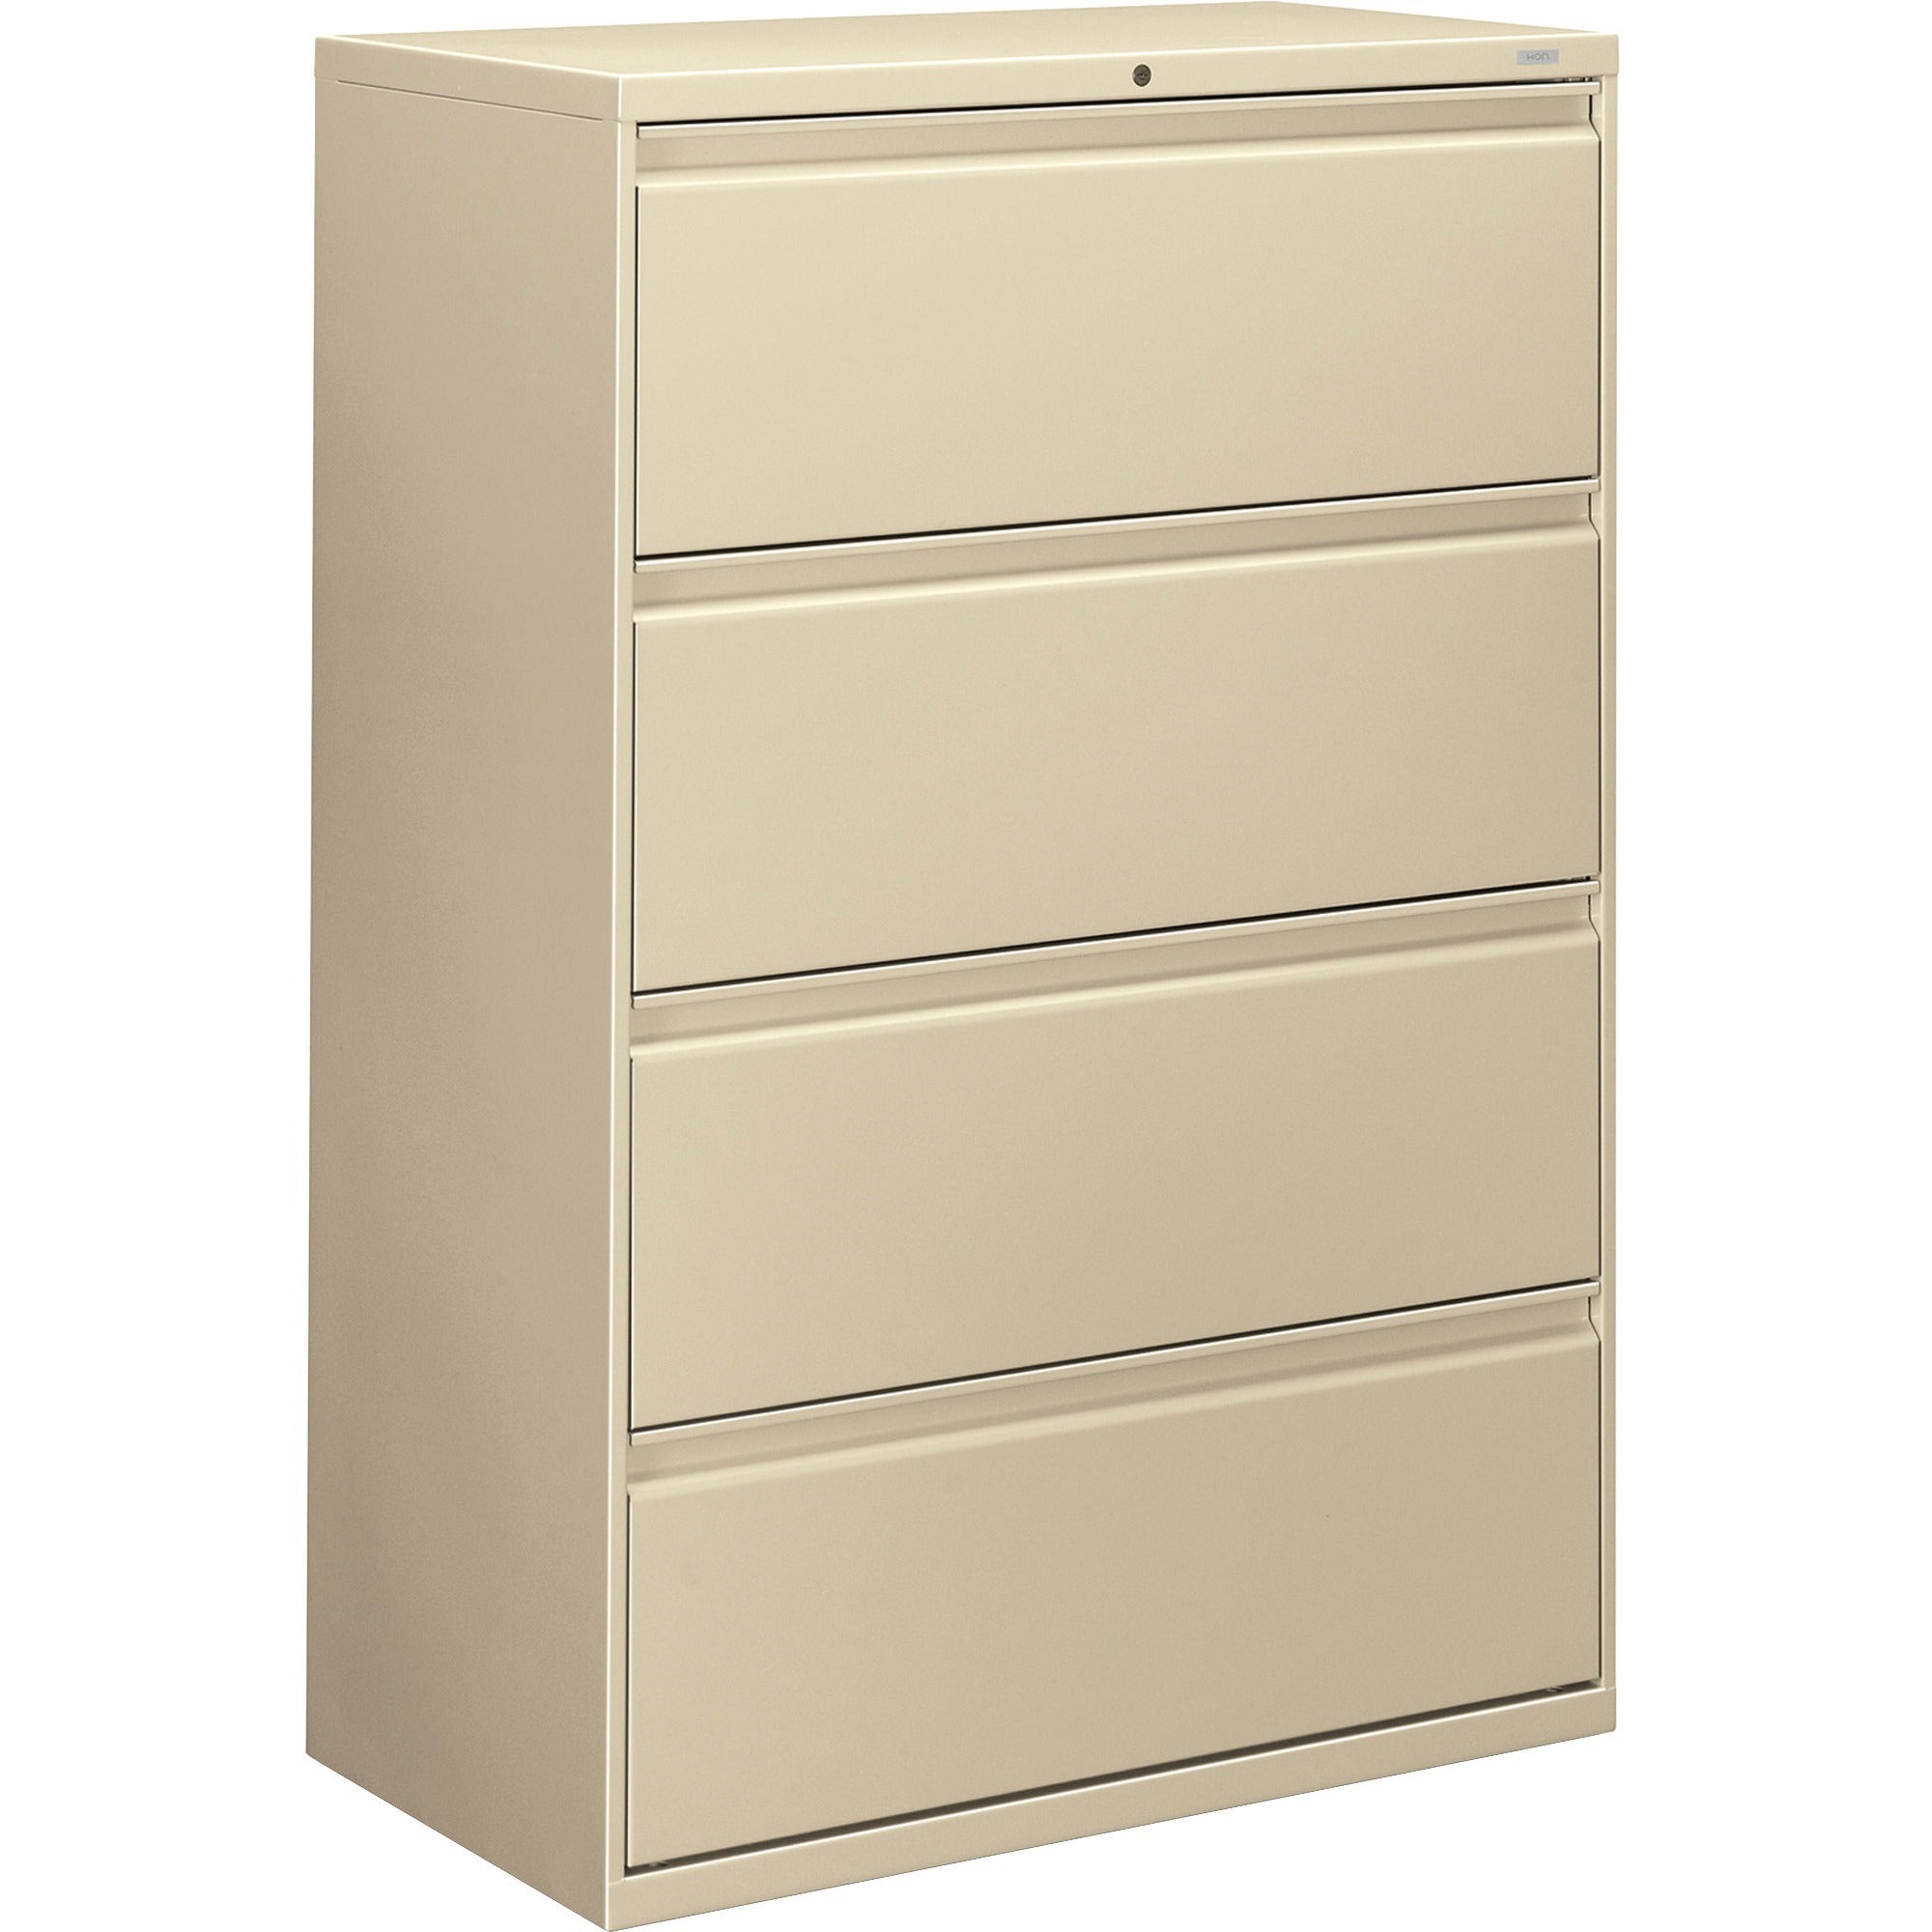 HON Brigade 800 H884 Lateral File - 36" x 18"53.3" - 4 Drawer(s) - Finish: Putty - 